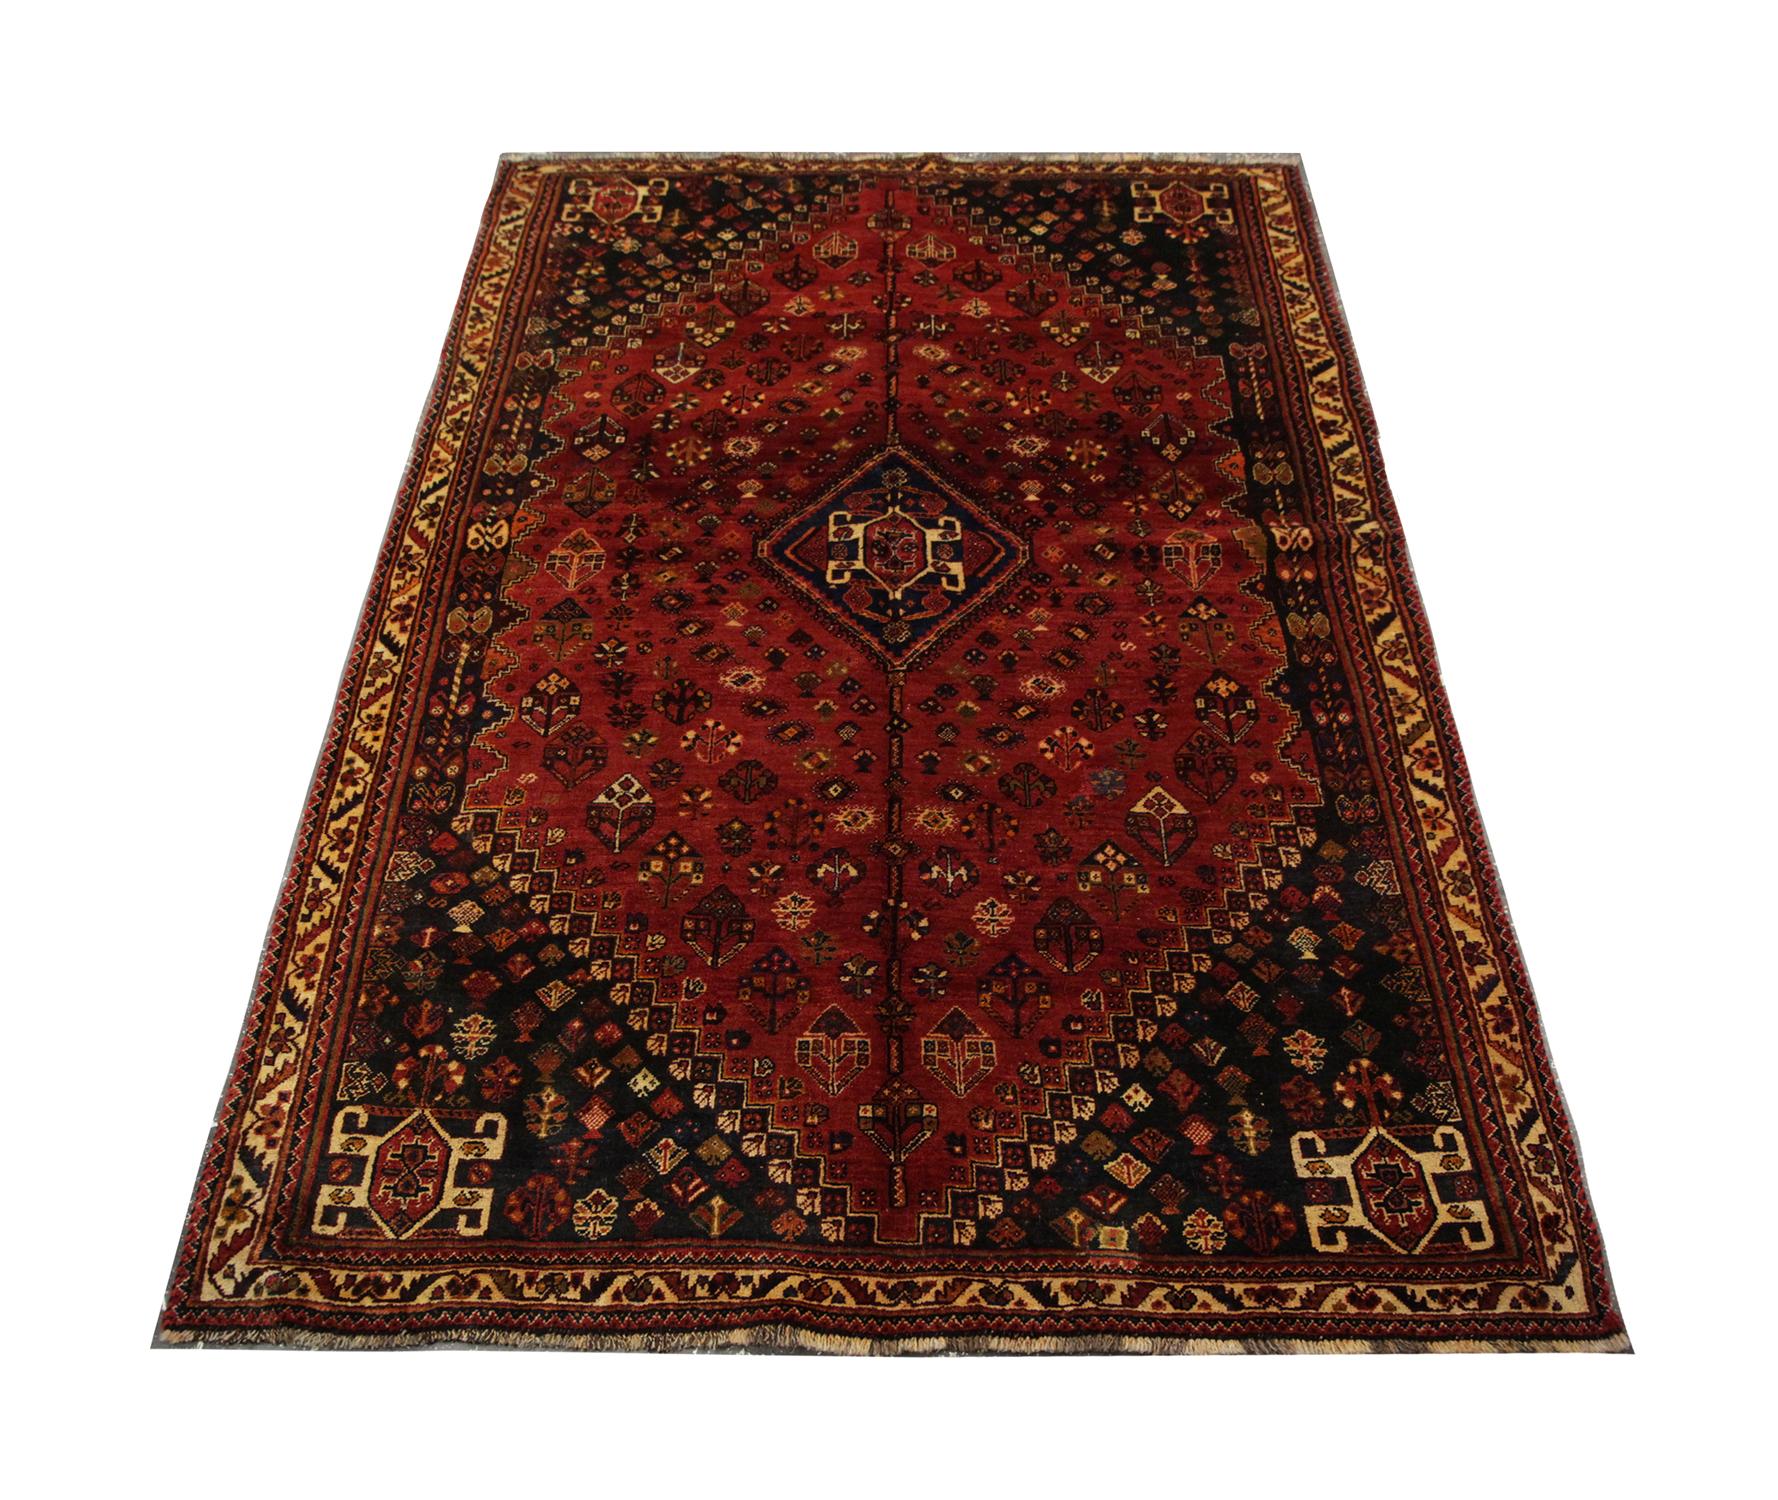 Deep rich tones have been used in the construction of this highly decorative tribal rug. Featuring a central medallion on a burnt orange/ red background surrounded by intricate motif details and a border with just as much rich detailing. This